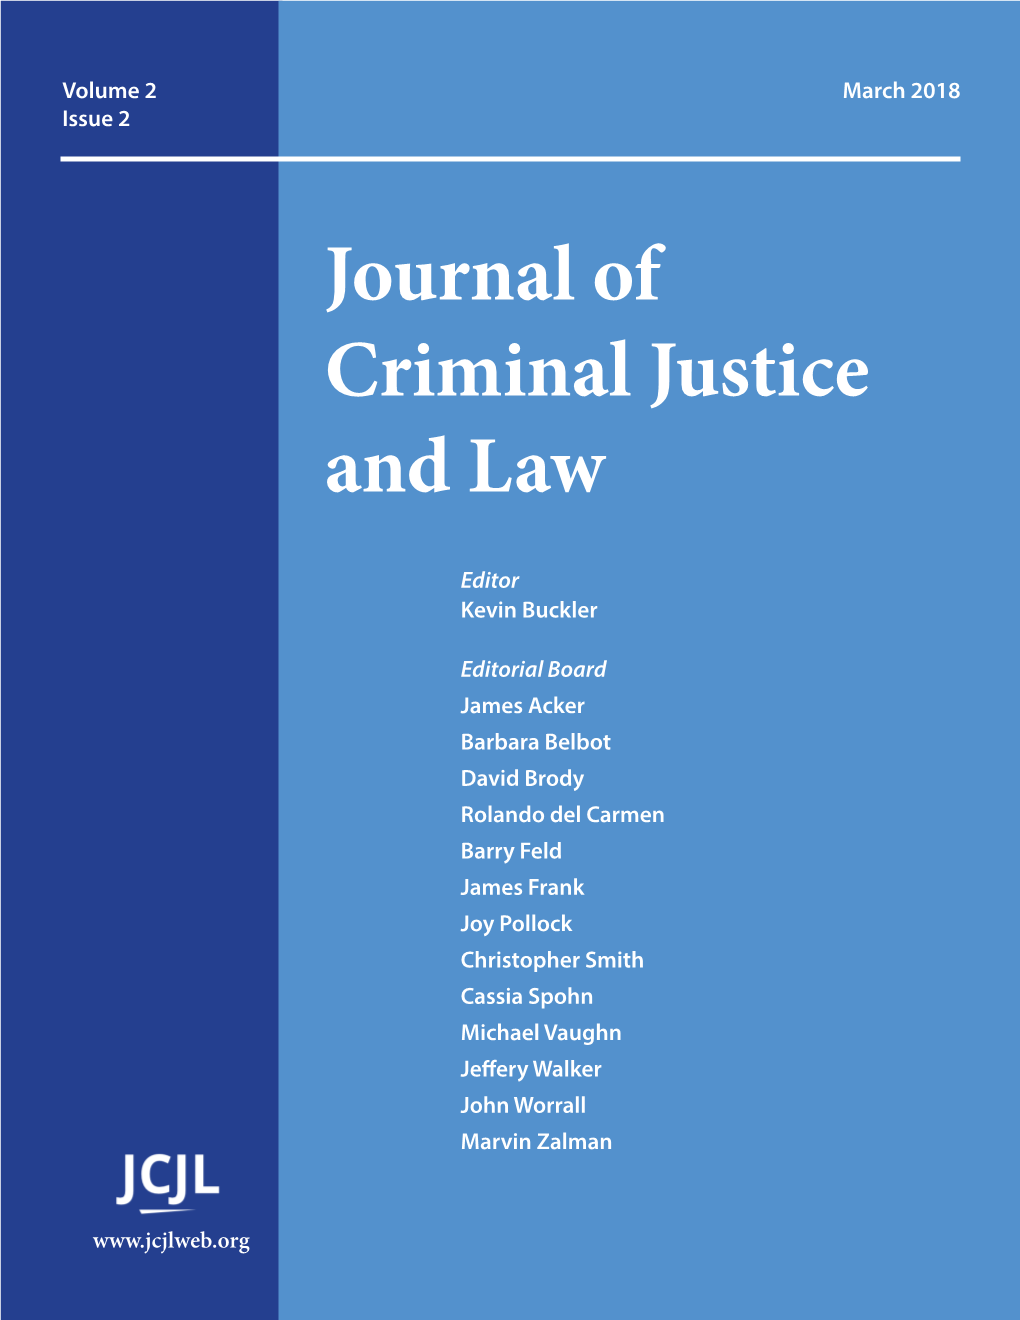 Journal of Criminal Justice and Law